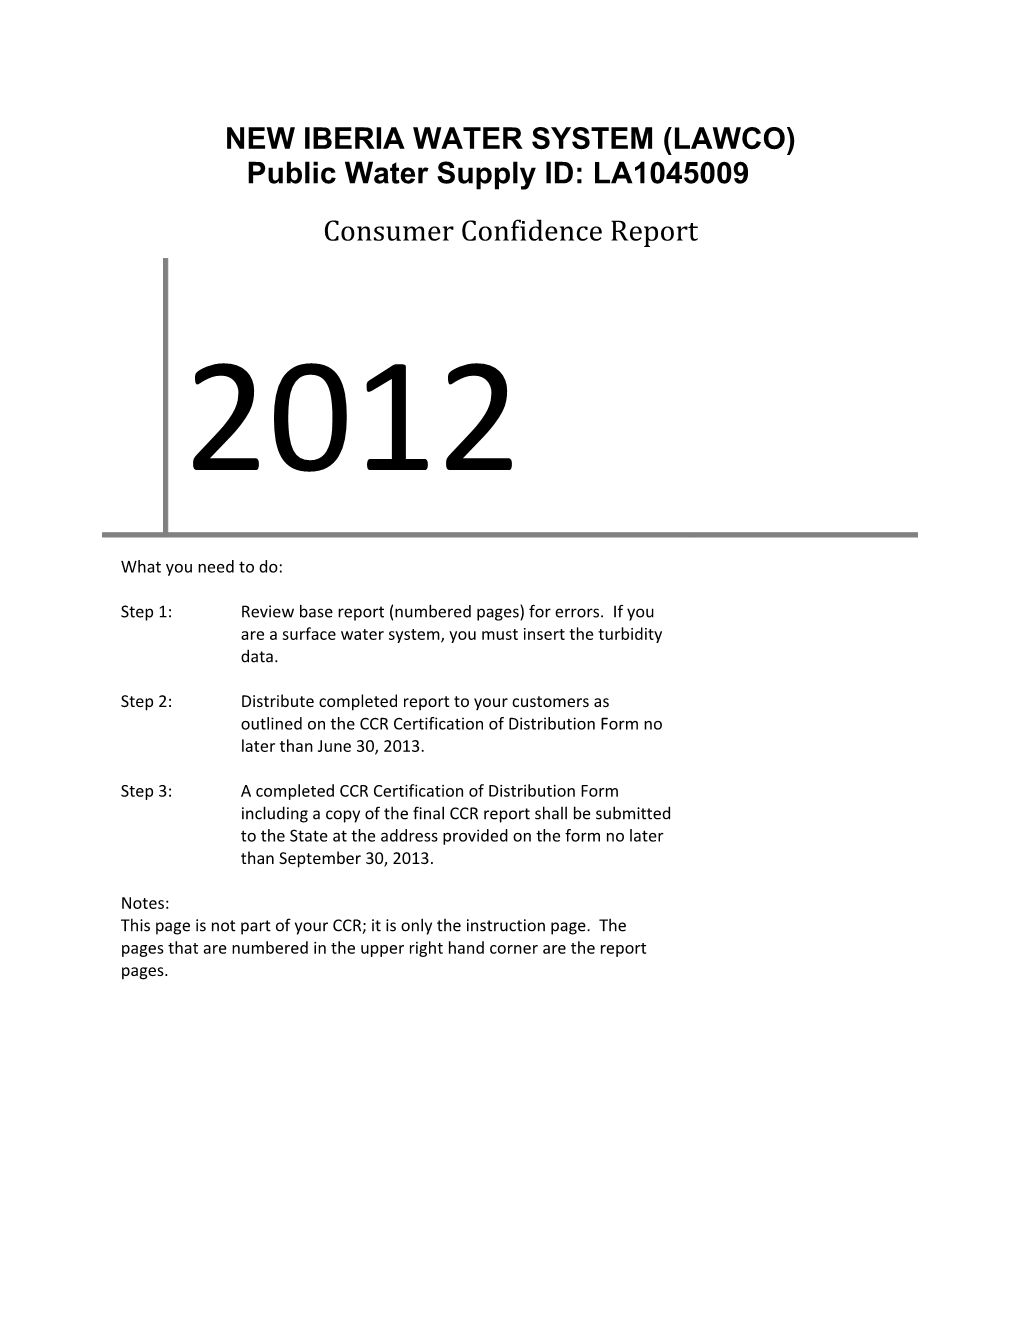 New Iberia Water System (Lawco)